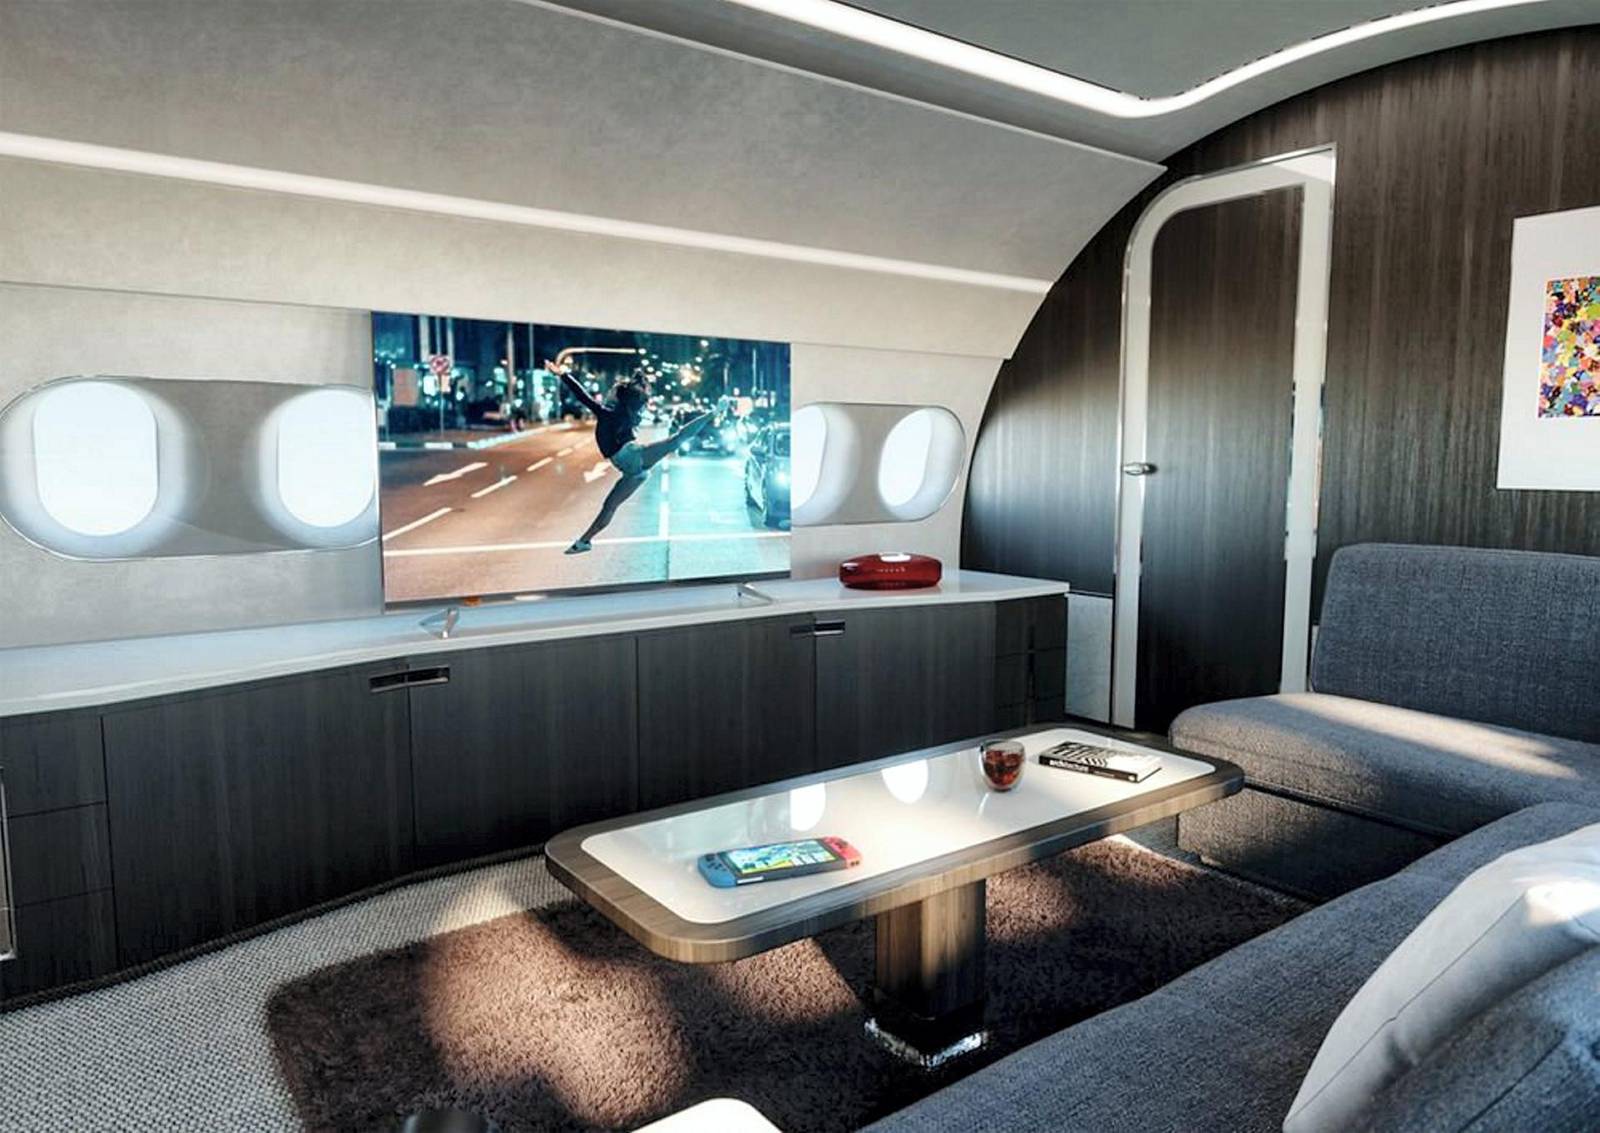 Airbus's new A220-100 private jet comes with a VIP cabin, king-size bed ...